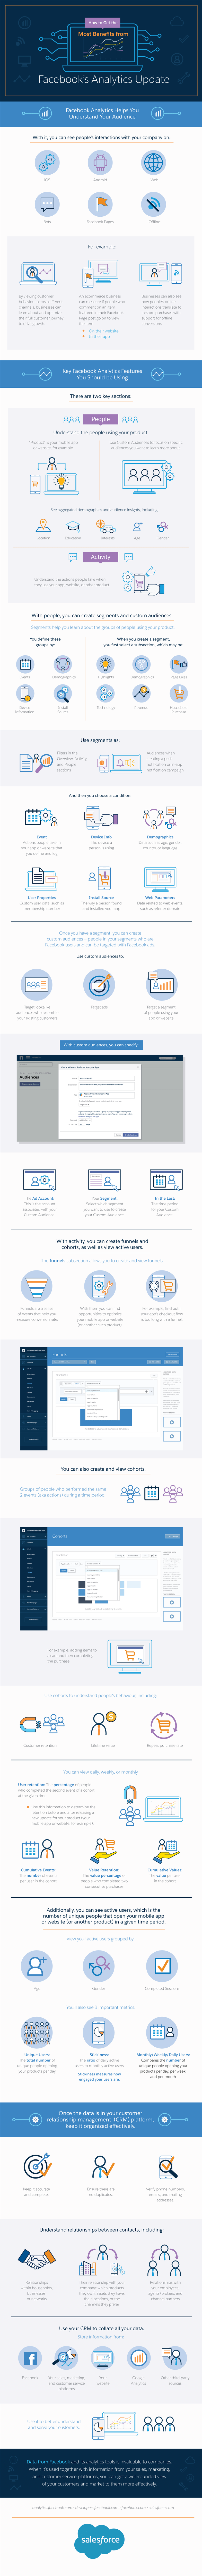 How to Get the Most Benefits from Facebook’s Analytics Update [Infographic]